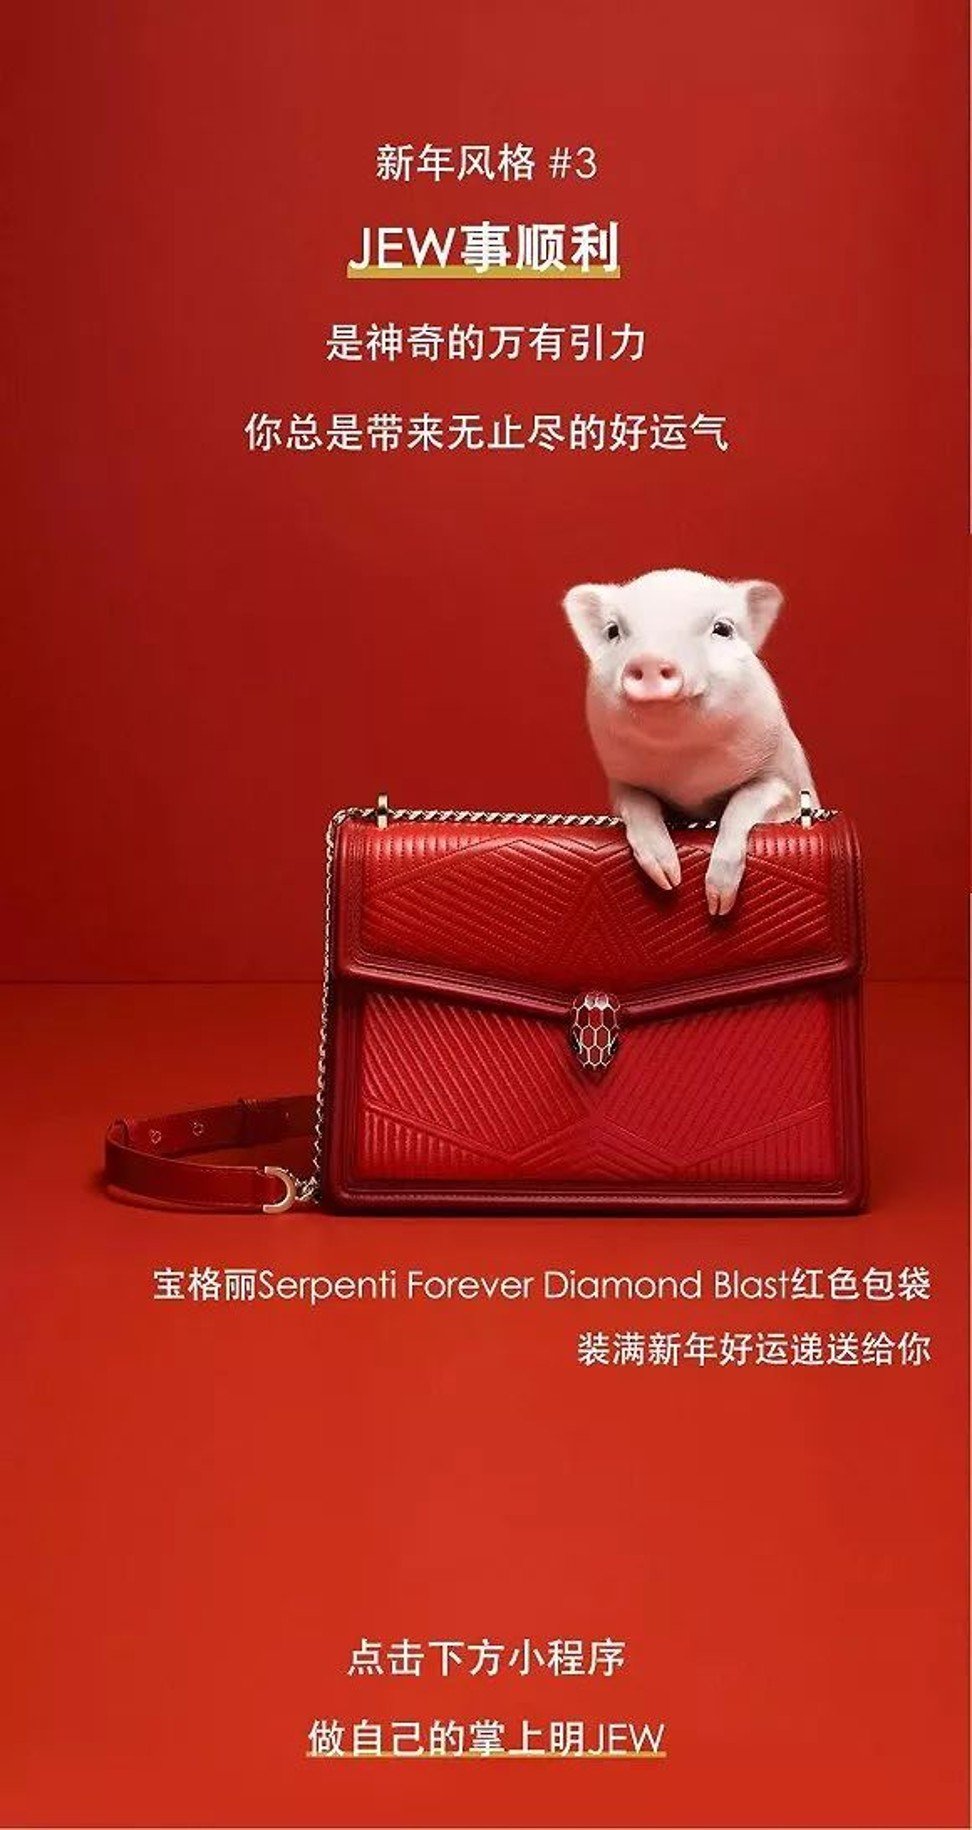 Lunar New Year campaigns: who's got it right – and who's making a pig's ear  of things?